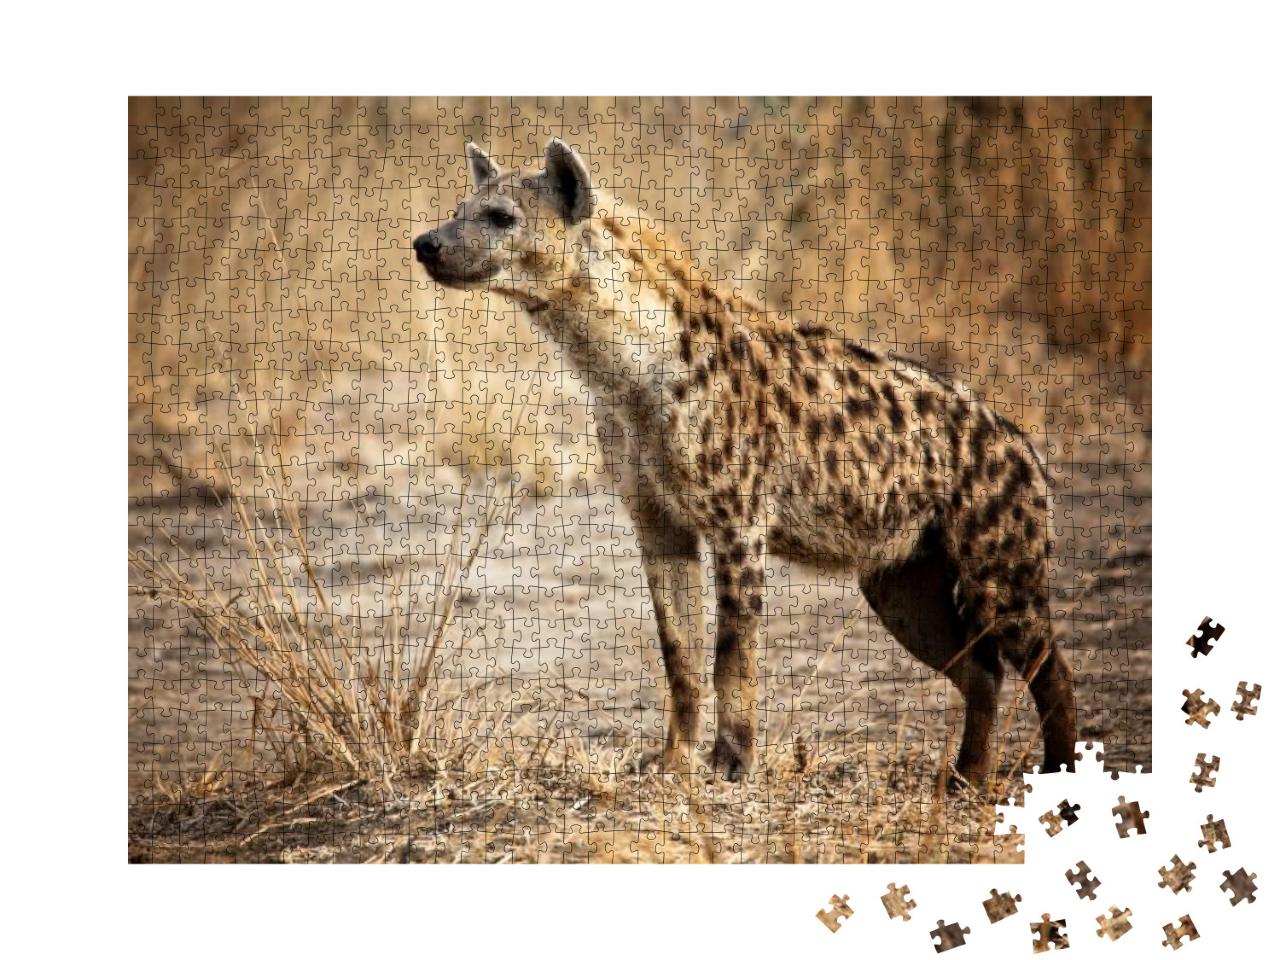 Spotted Hyena in Luangwa National Park Zambia... Jigsaw Puzzle with 1000 pieces